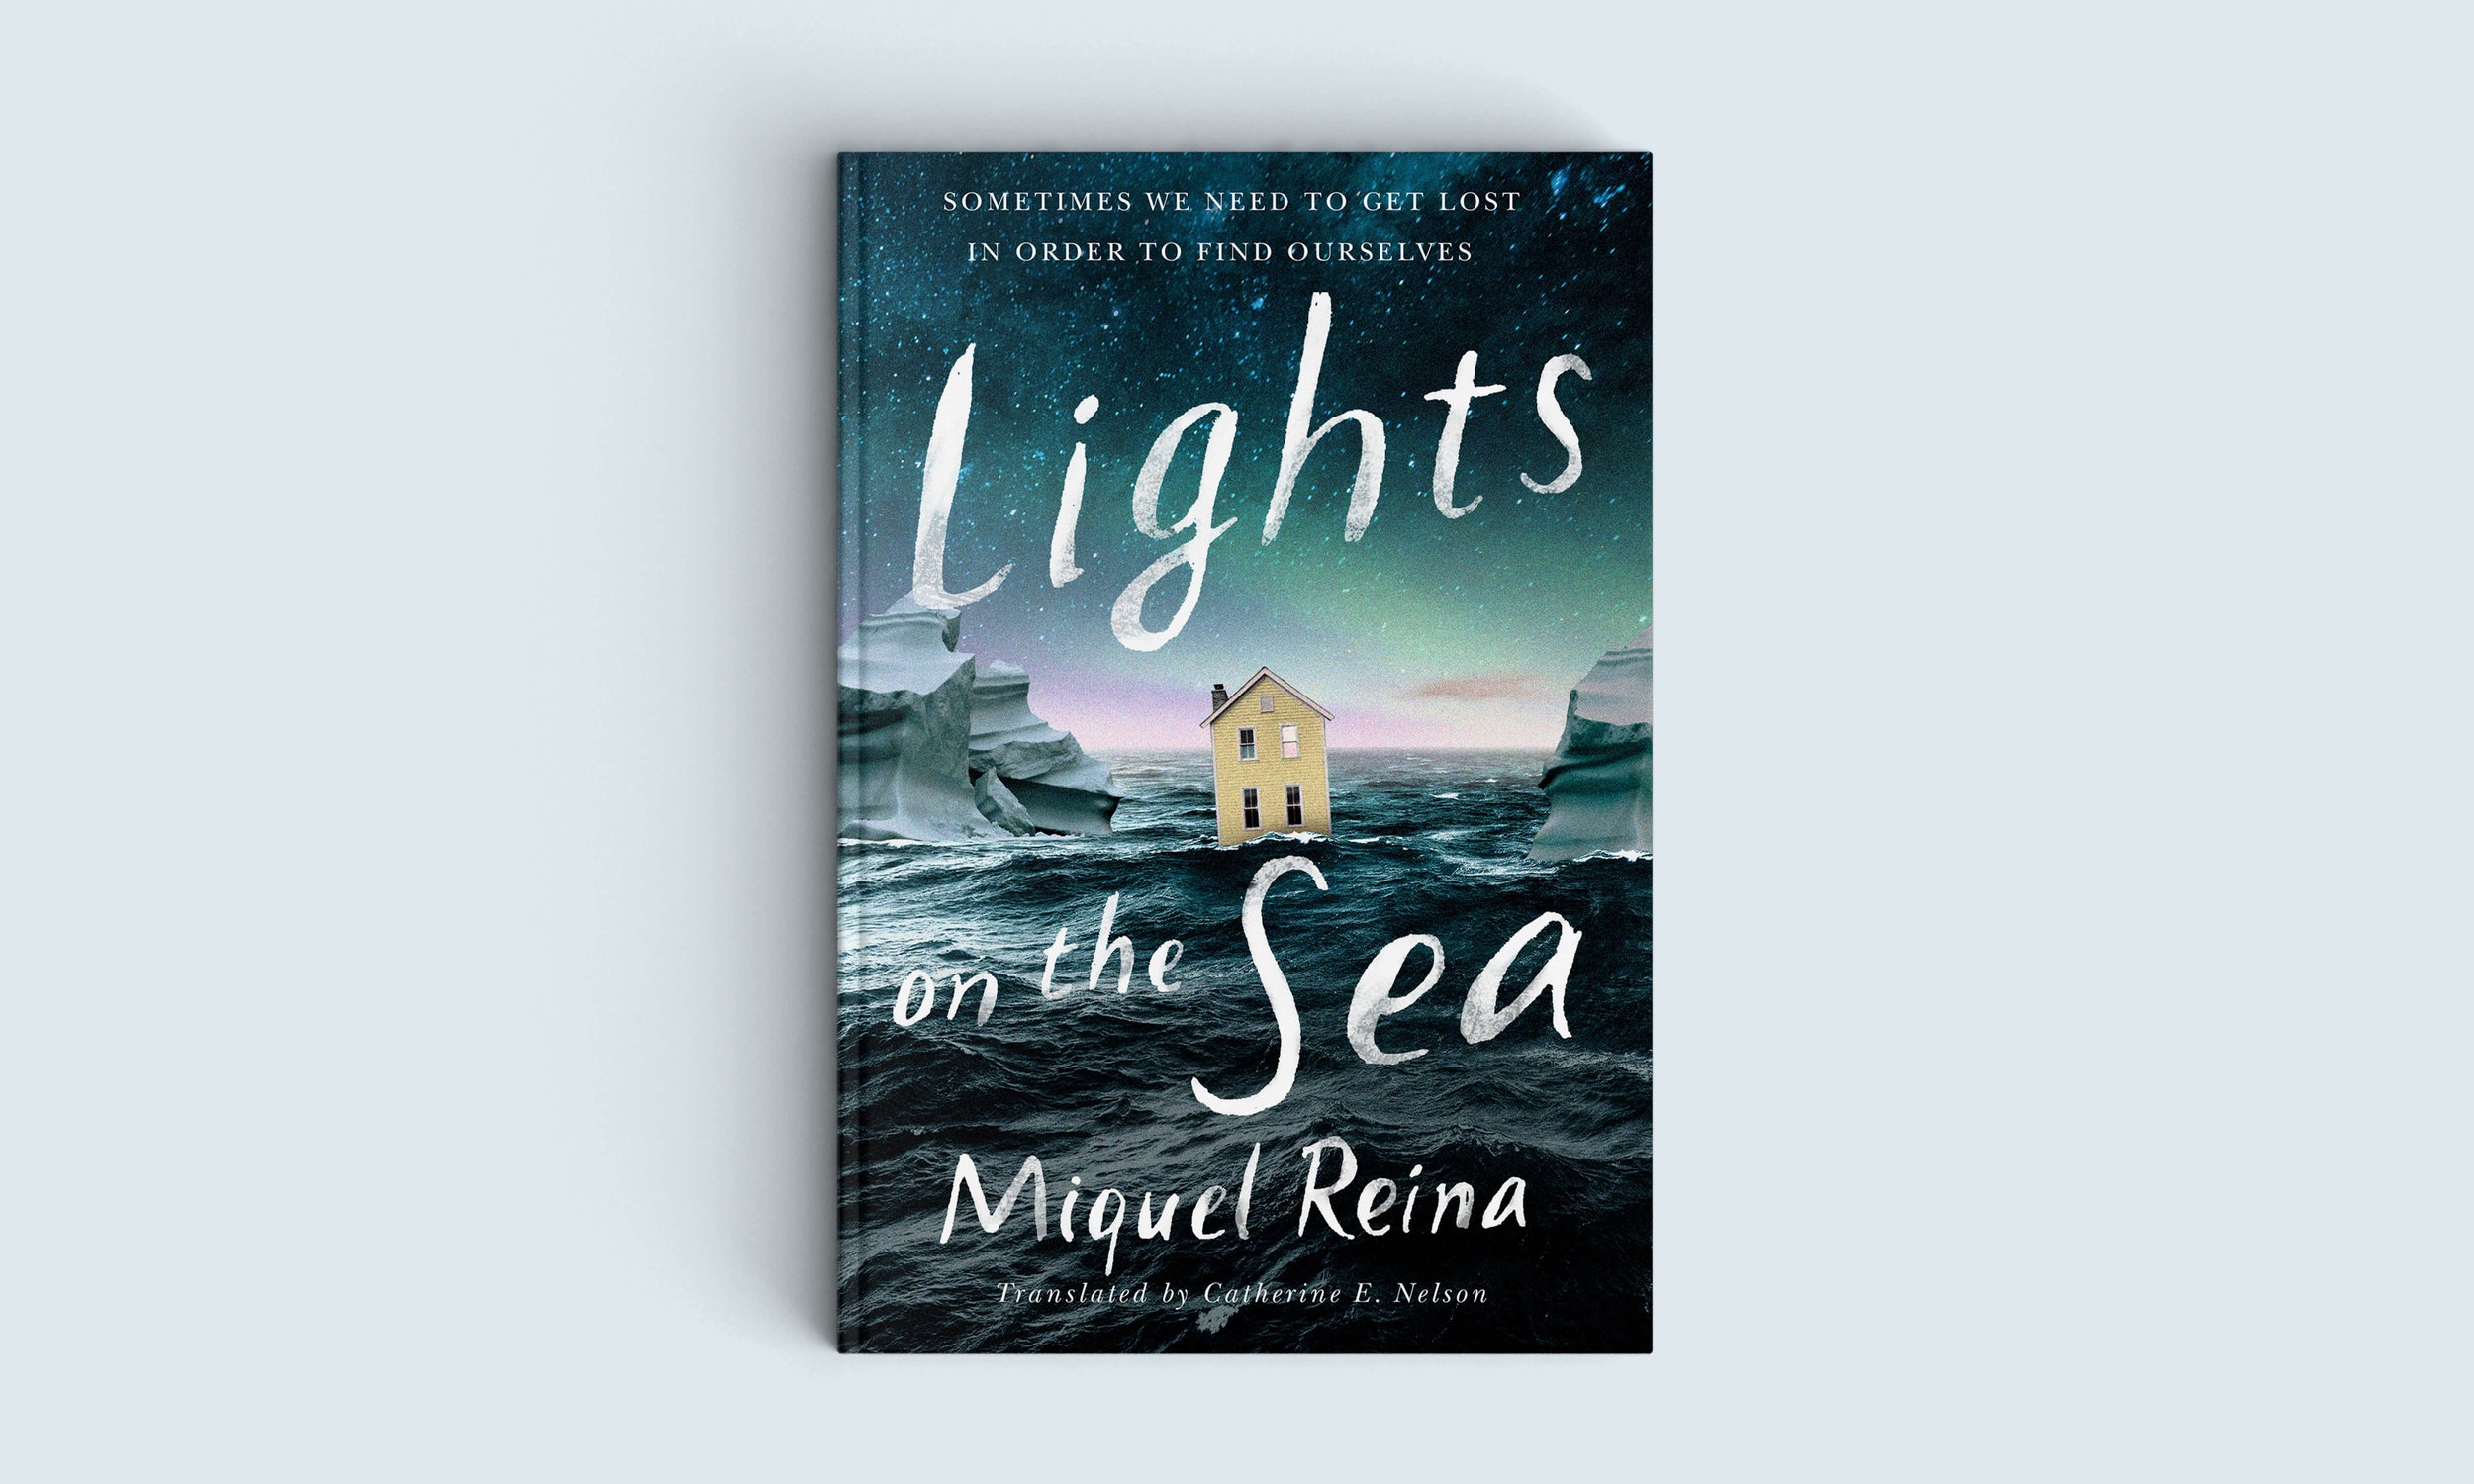 Lights on the Sea by Miquel Reina